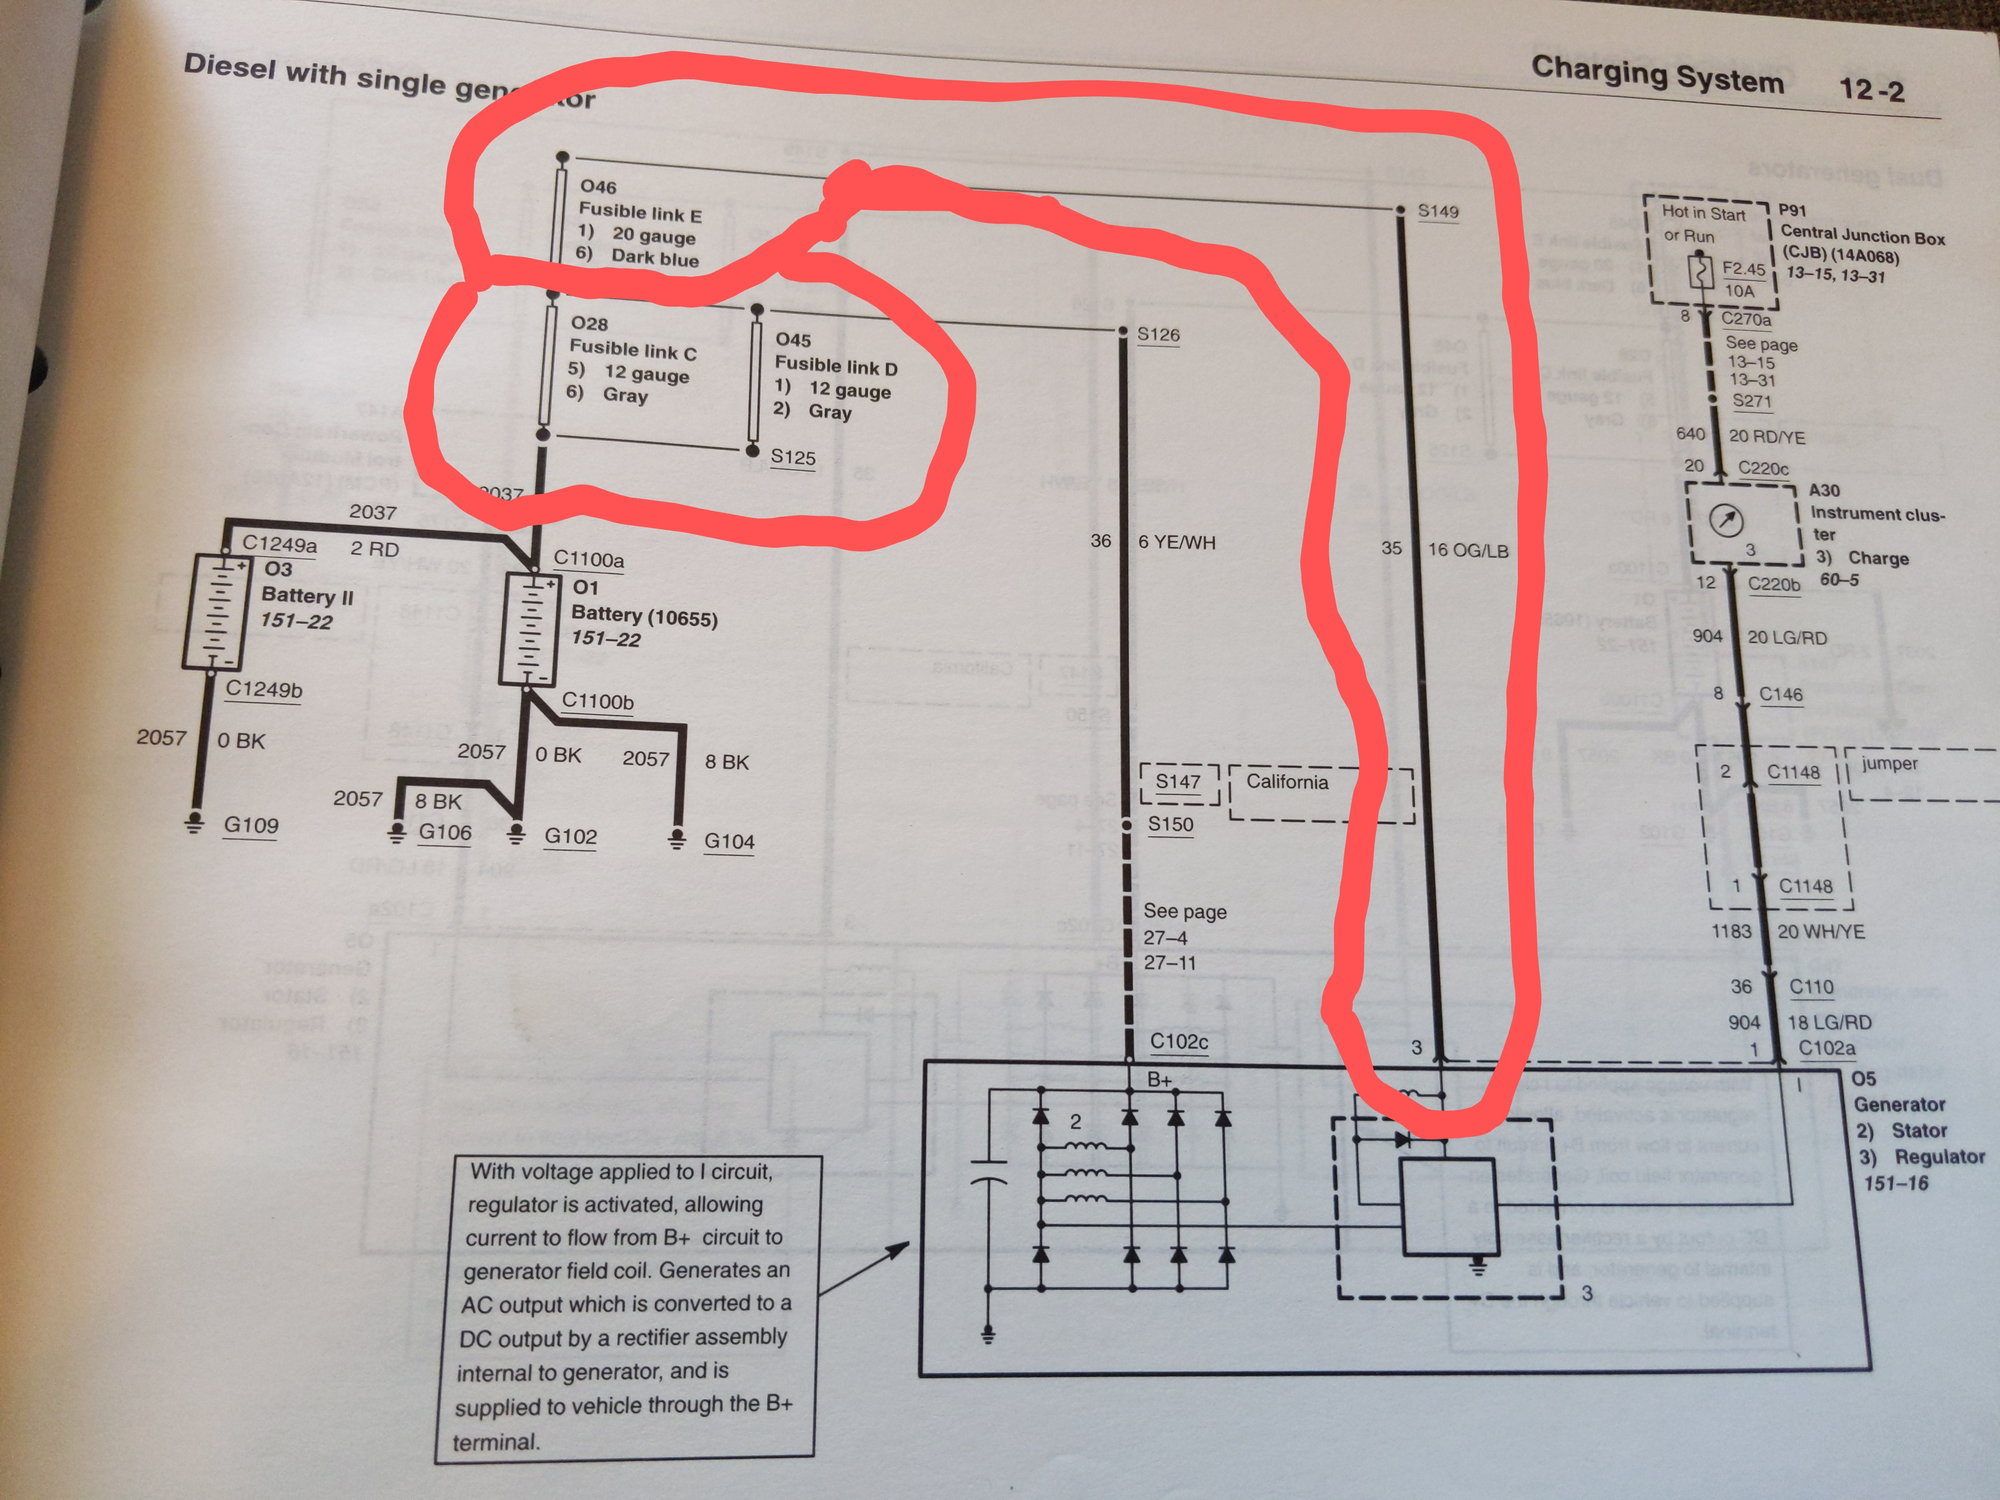 Alternator wire / fusible link electrical help needed - Ford Truck